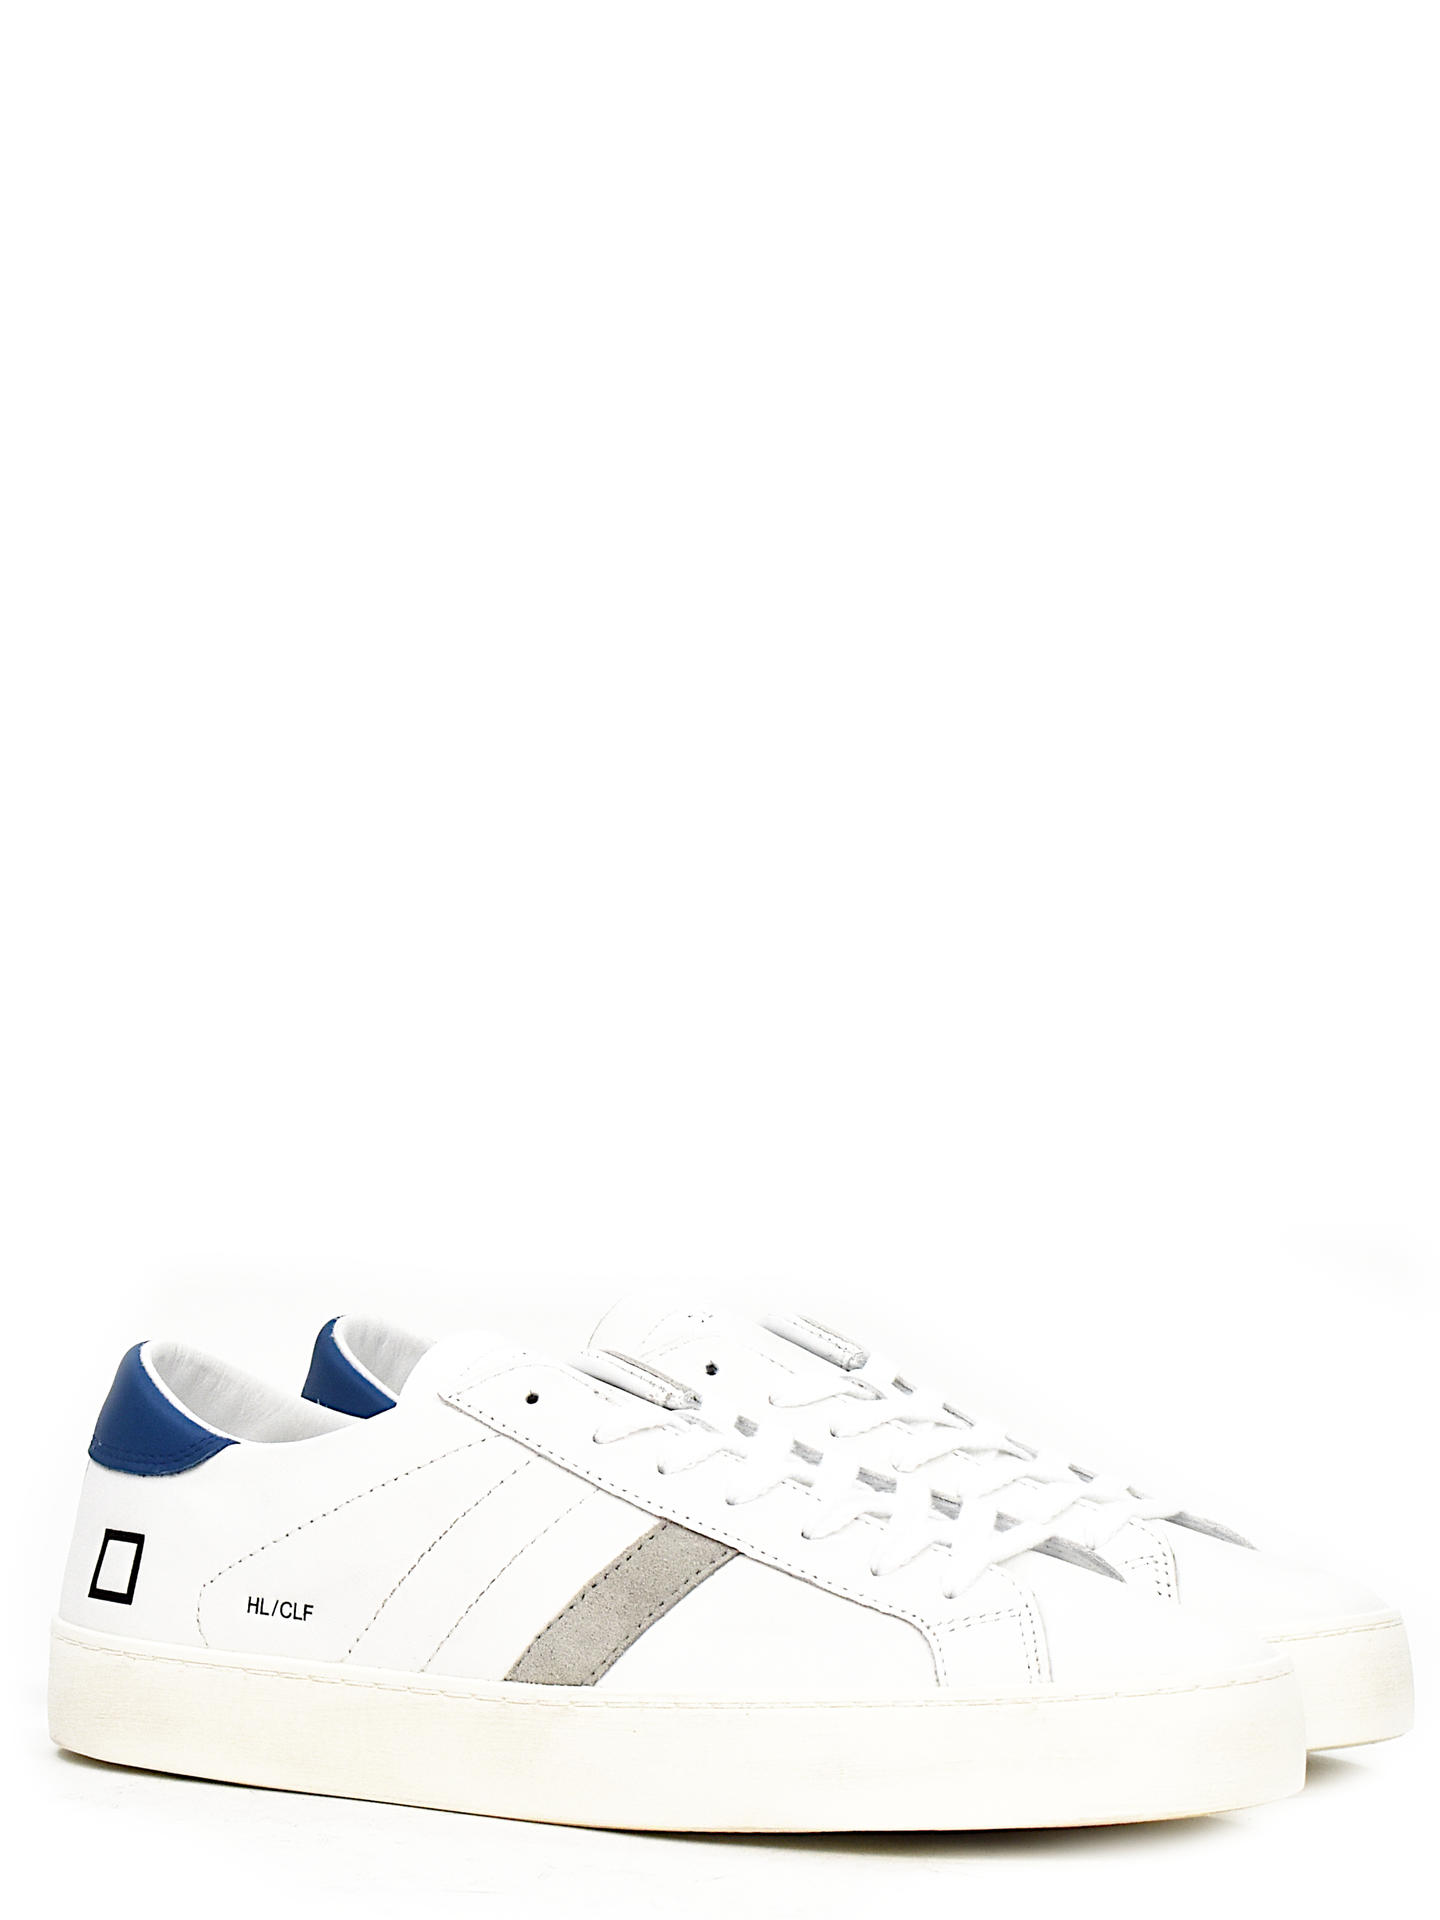 SNEAKERS D.A.T.E HLCAWEH BIANCO/BLU